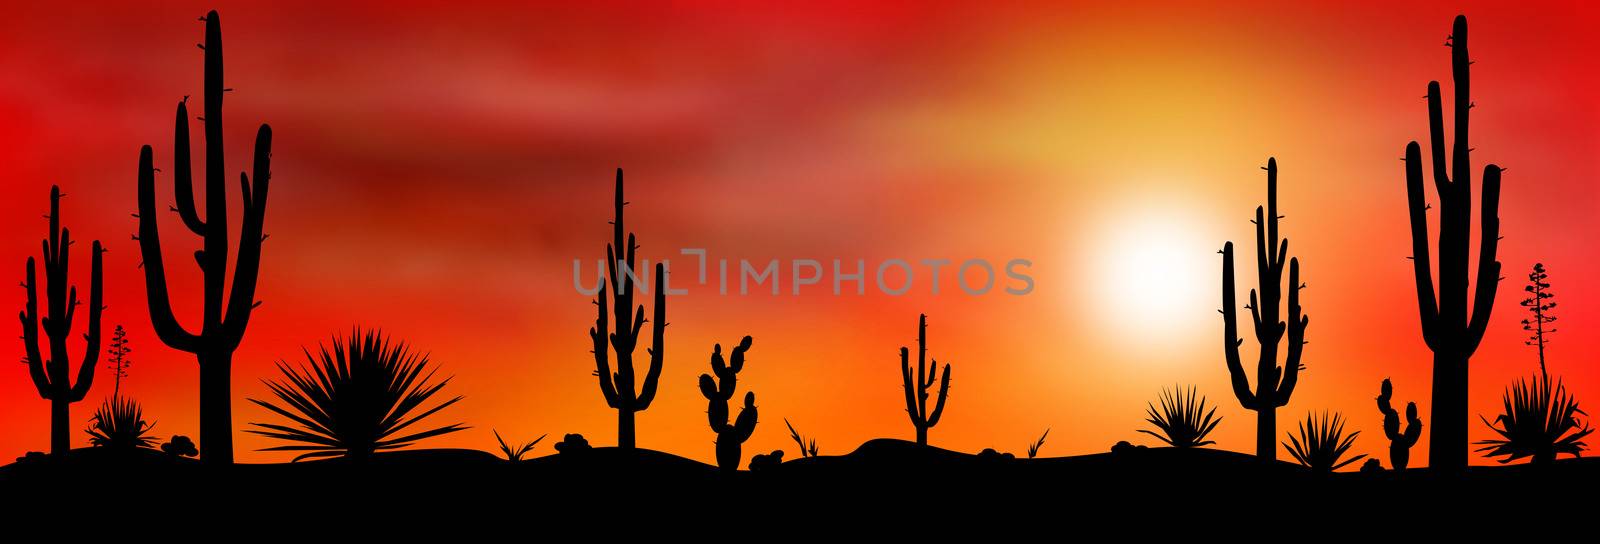 Mexico desert sunset 2 by liolle